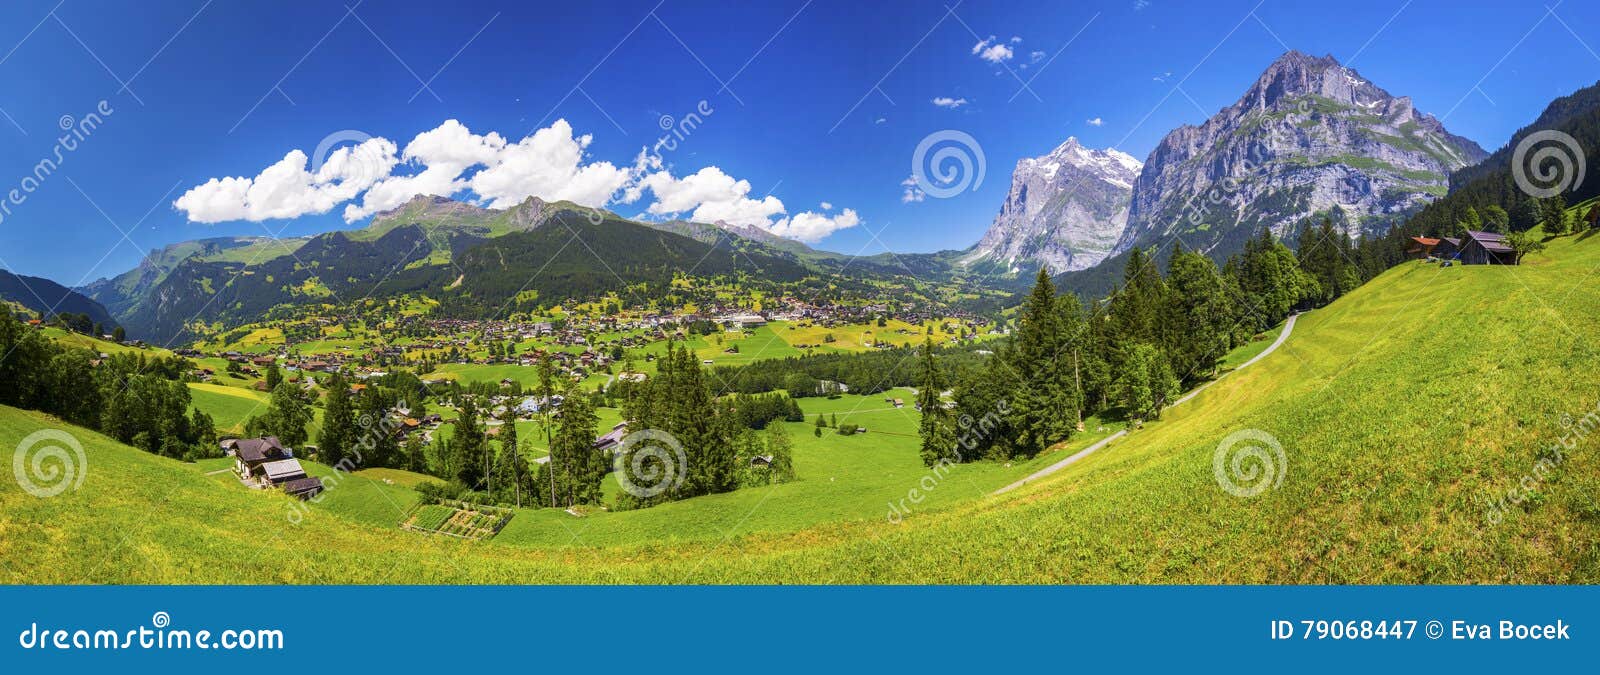 famous grindelwald valley, green forest, alps chalets and swiss alps, berner oberland, switzerland